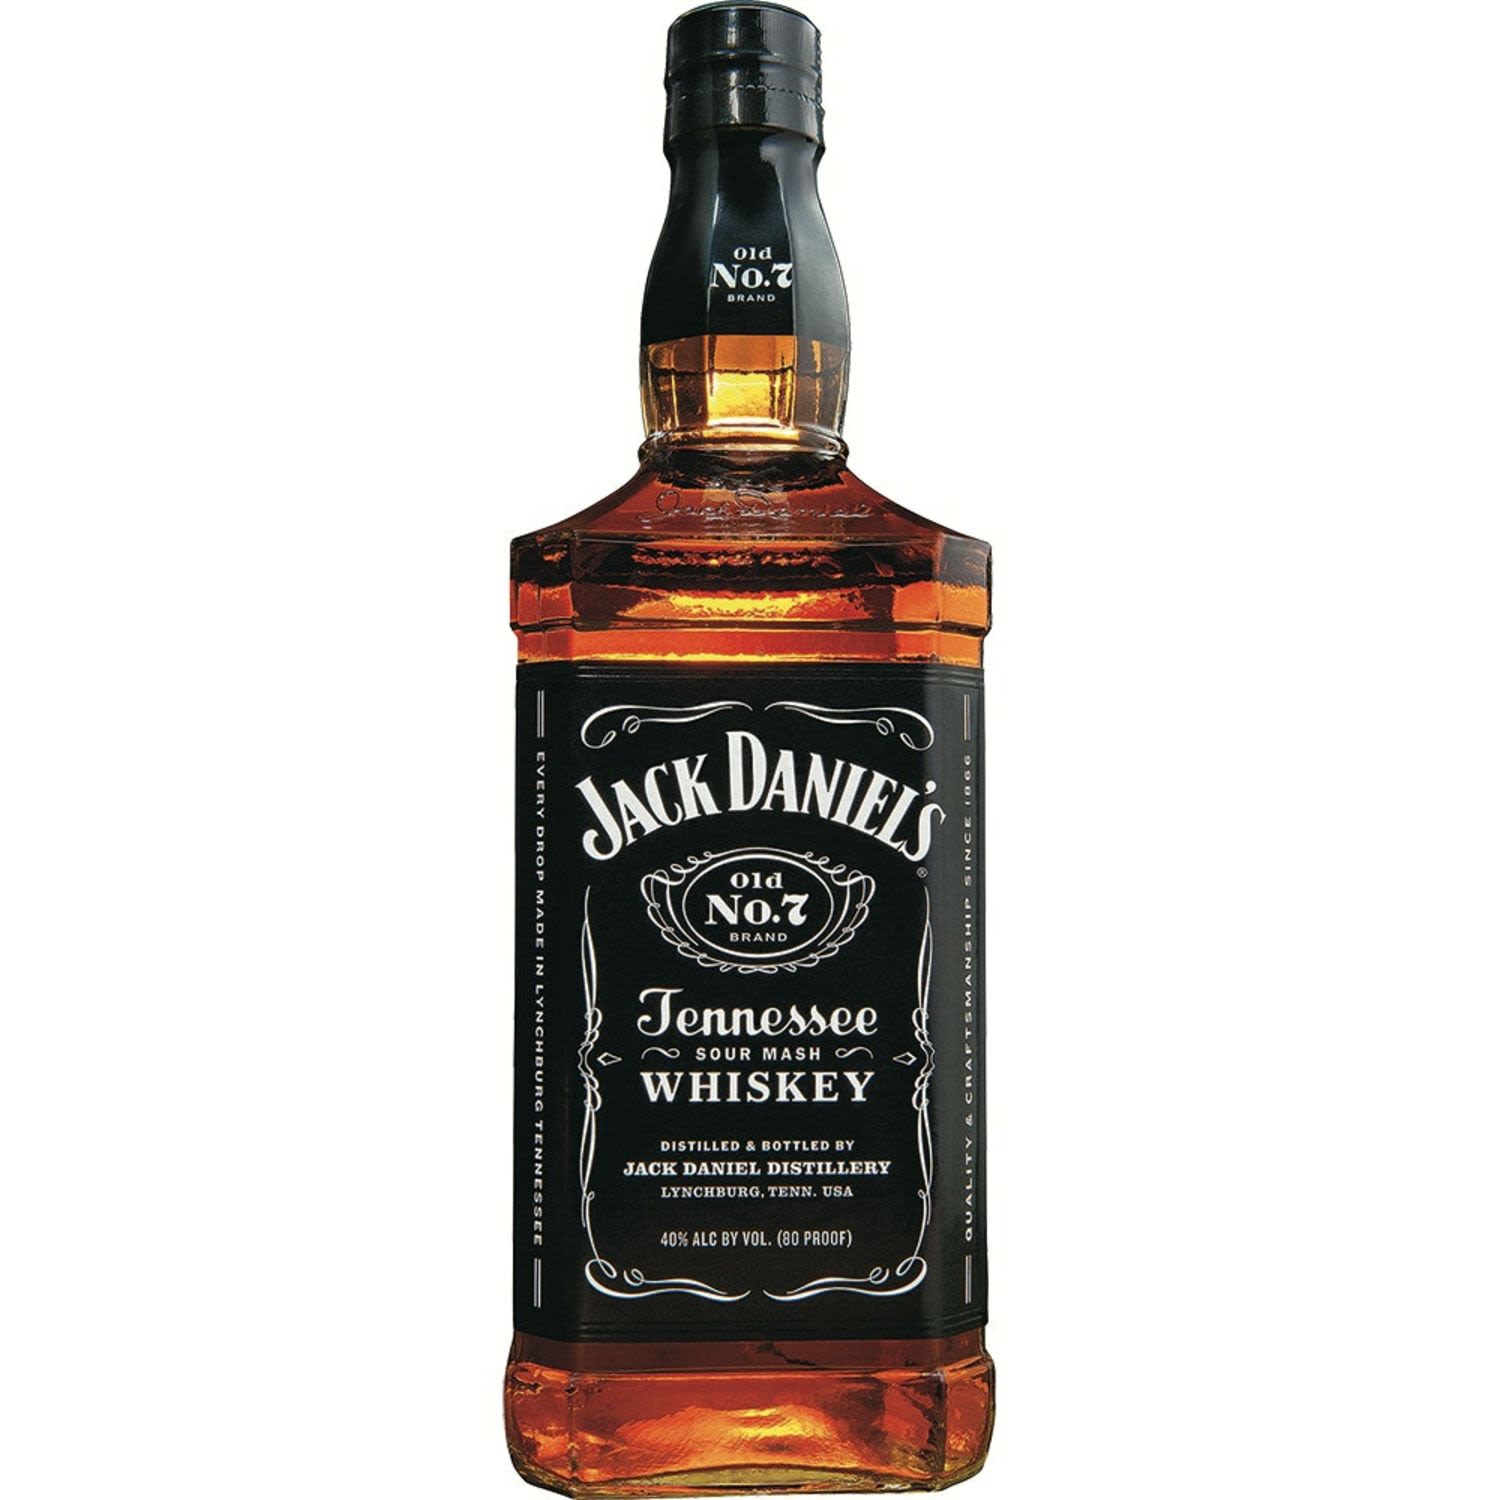 Jack Daniel's Old No. 7 Tennessee Whiskey 700mL Bottle